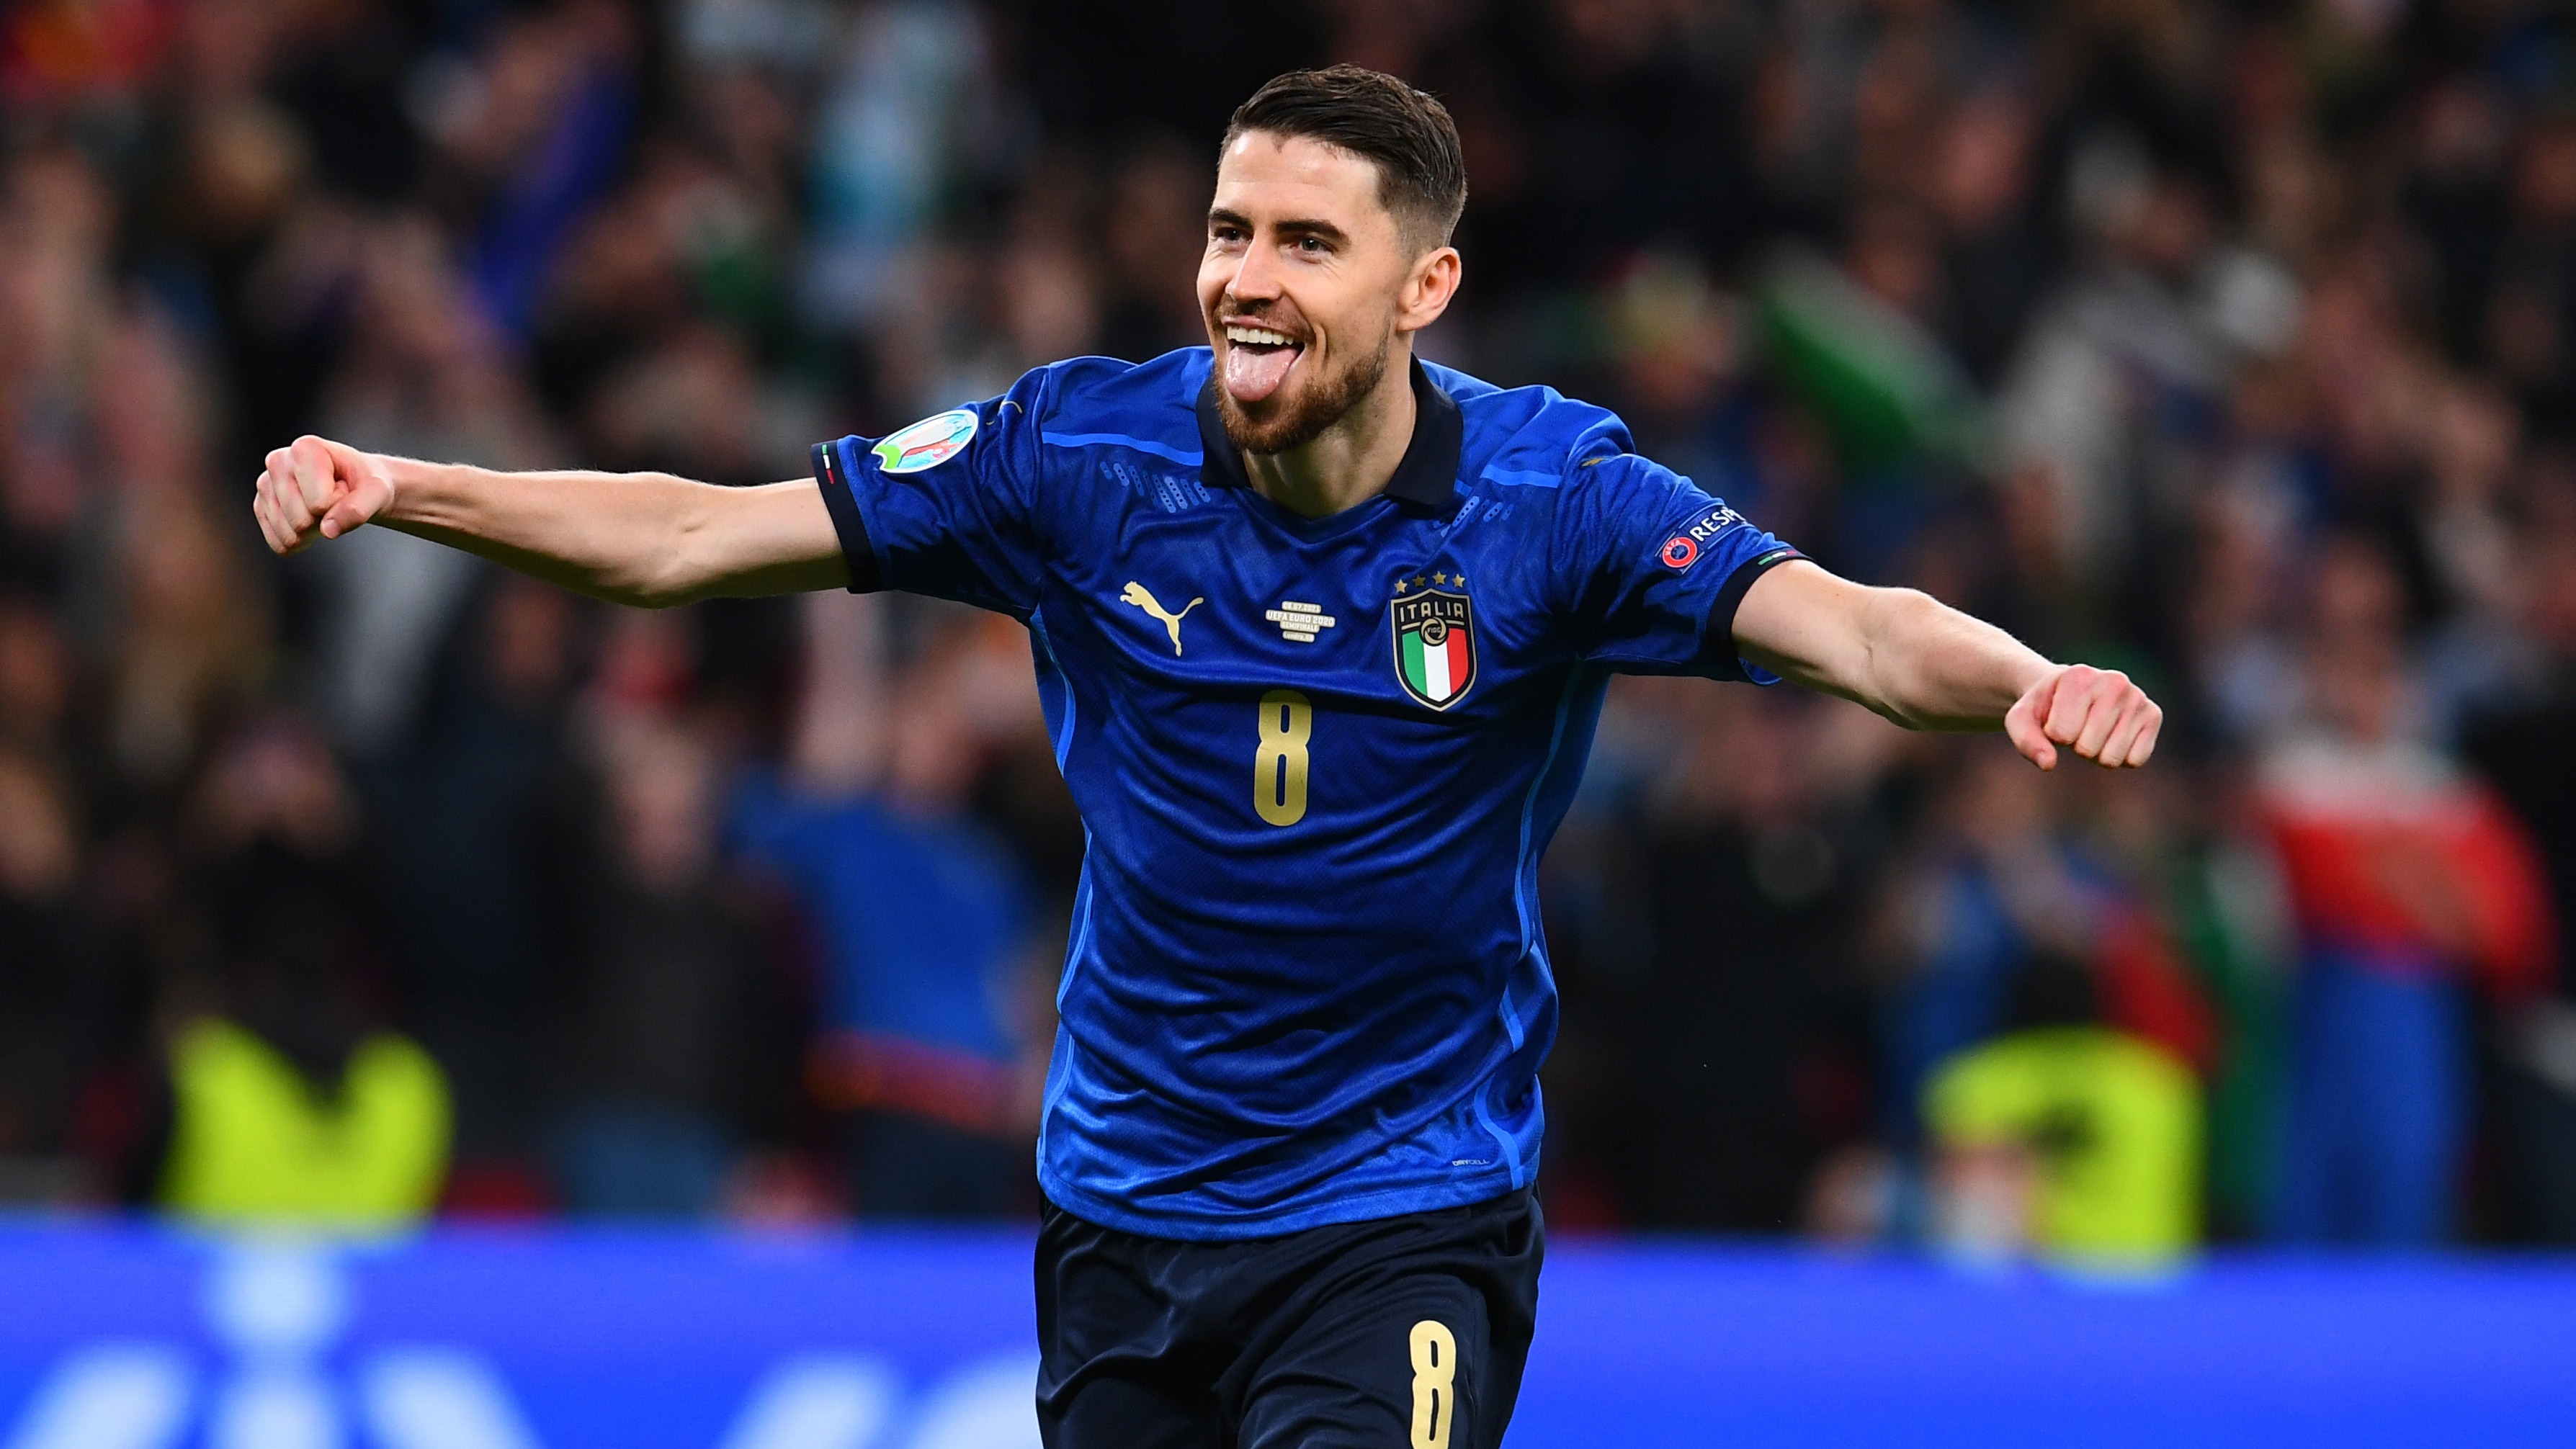 Jorginho agrees it would be a ‘scandal’ if he wins Ballon d’Or over Messi, claims Cassano